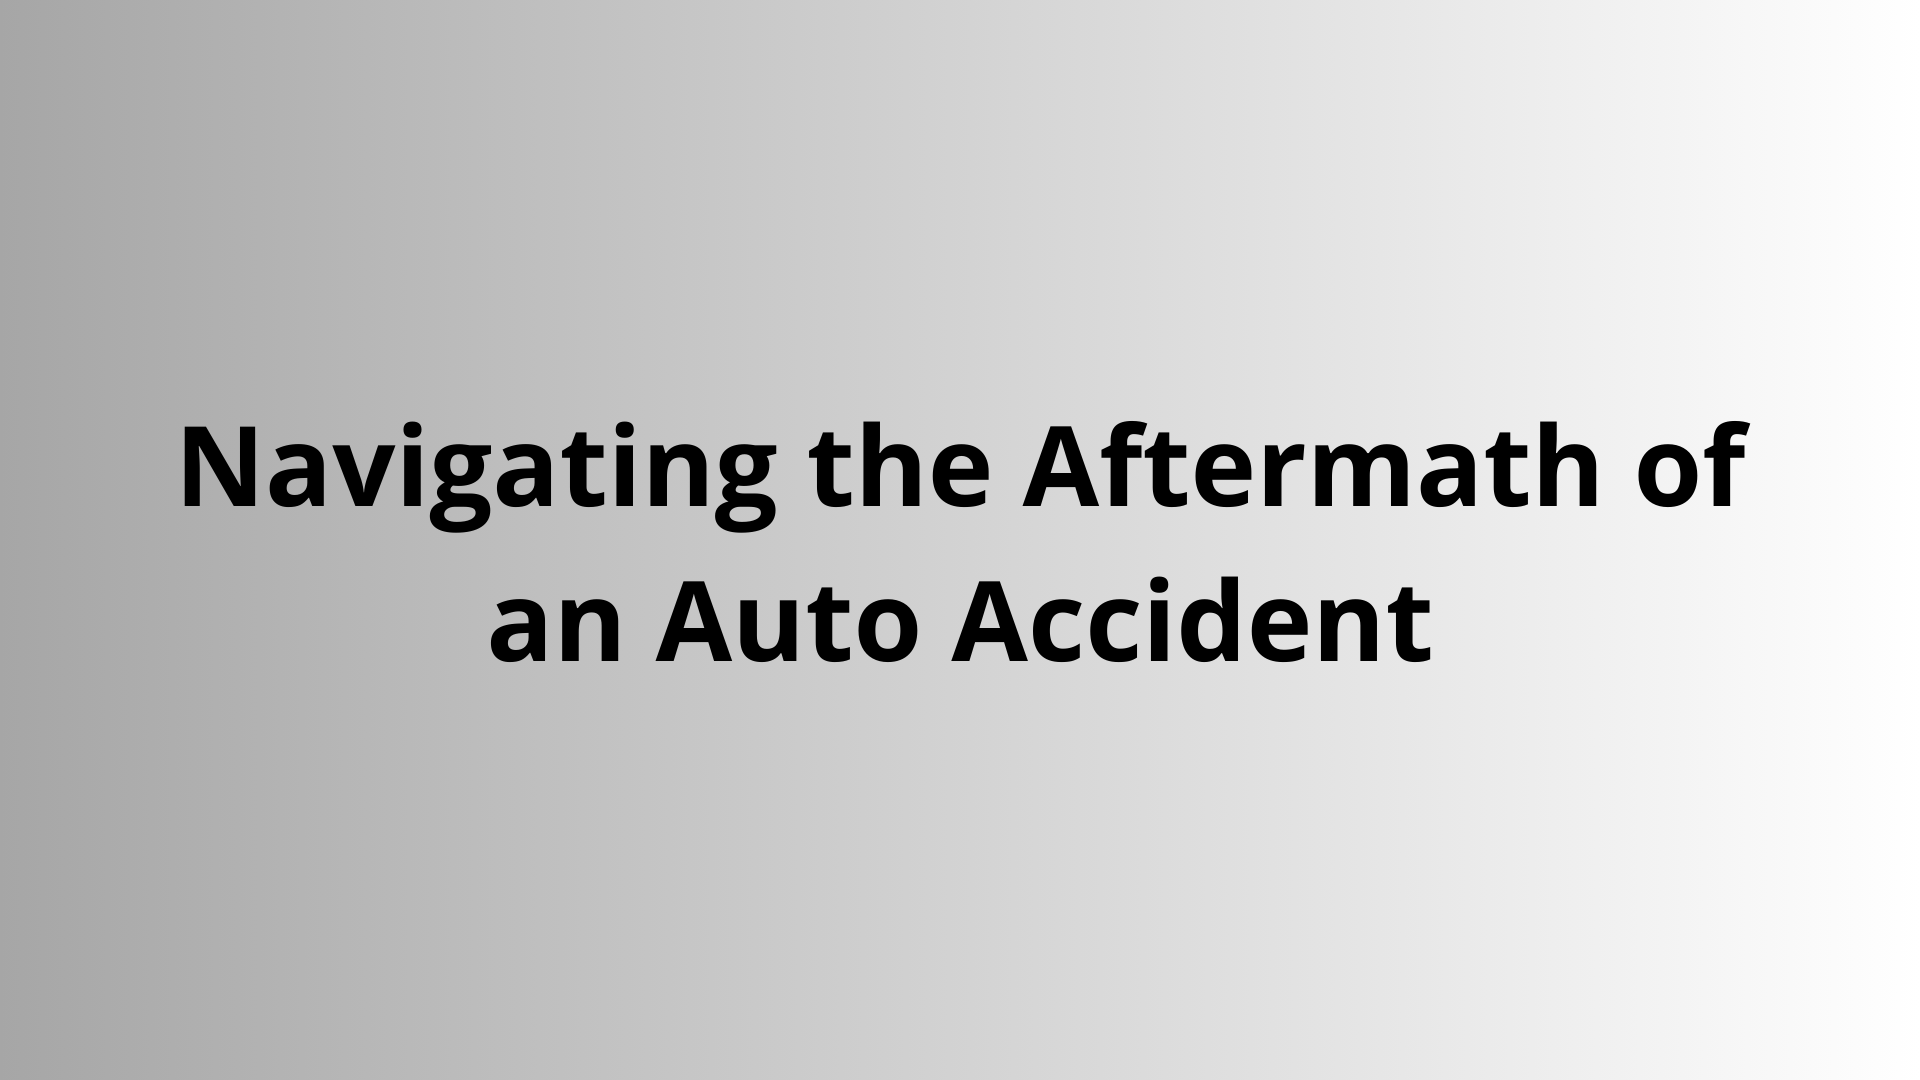 Navigating the Aftermath of an Auto Accident